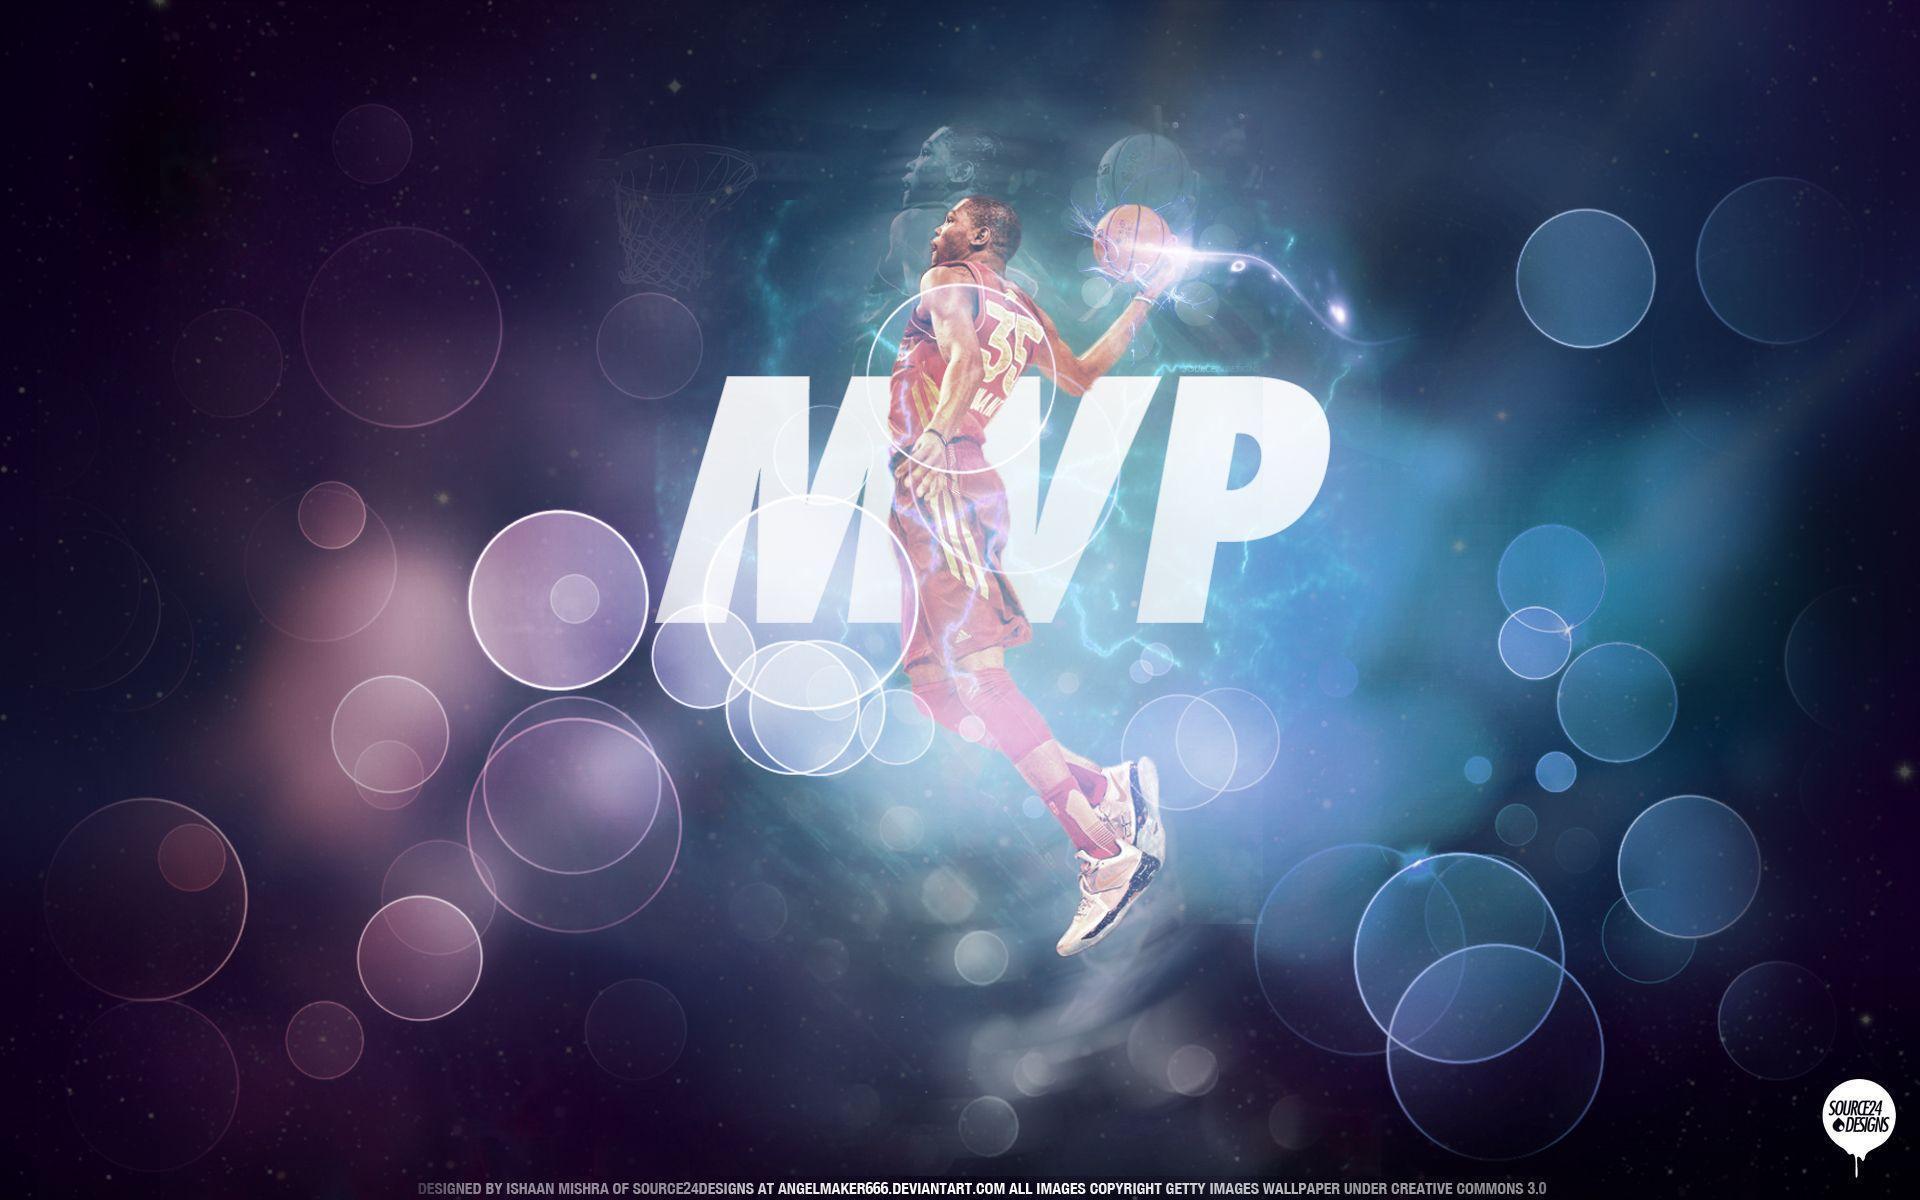 Celebrities, Kevin Durant All Star M Wallpaper IshaanMishra On